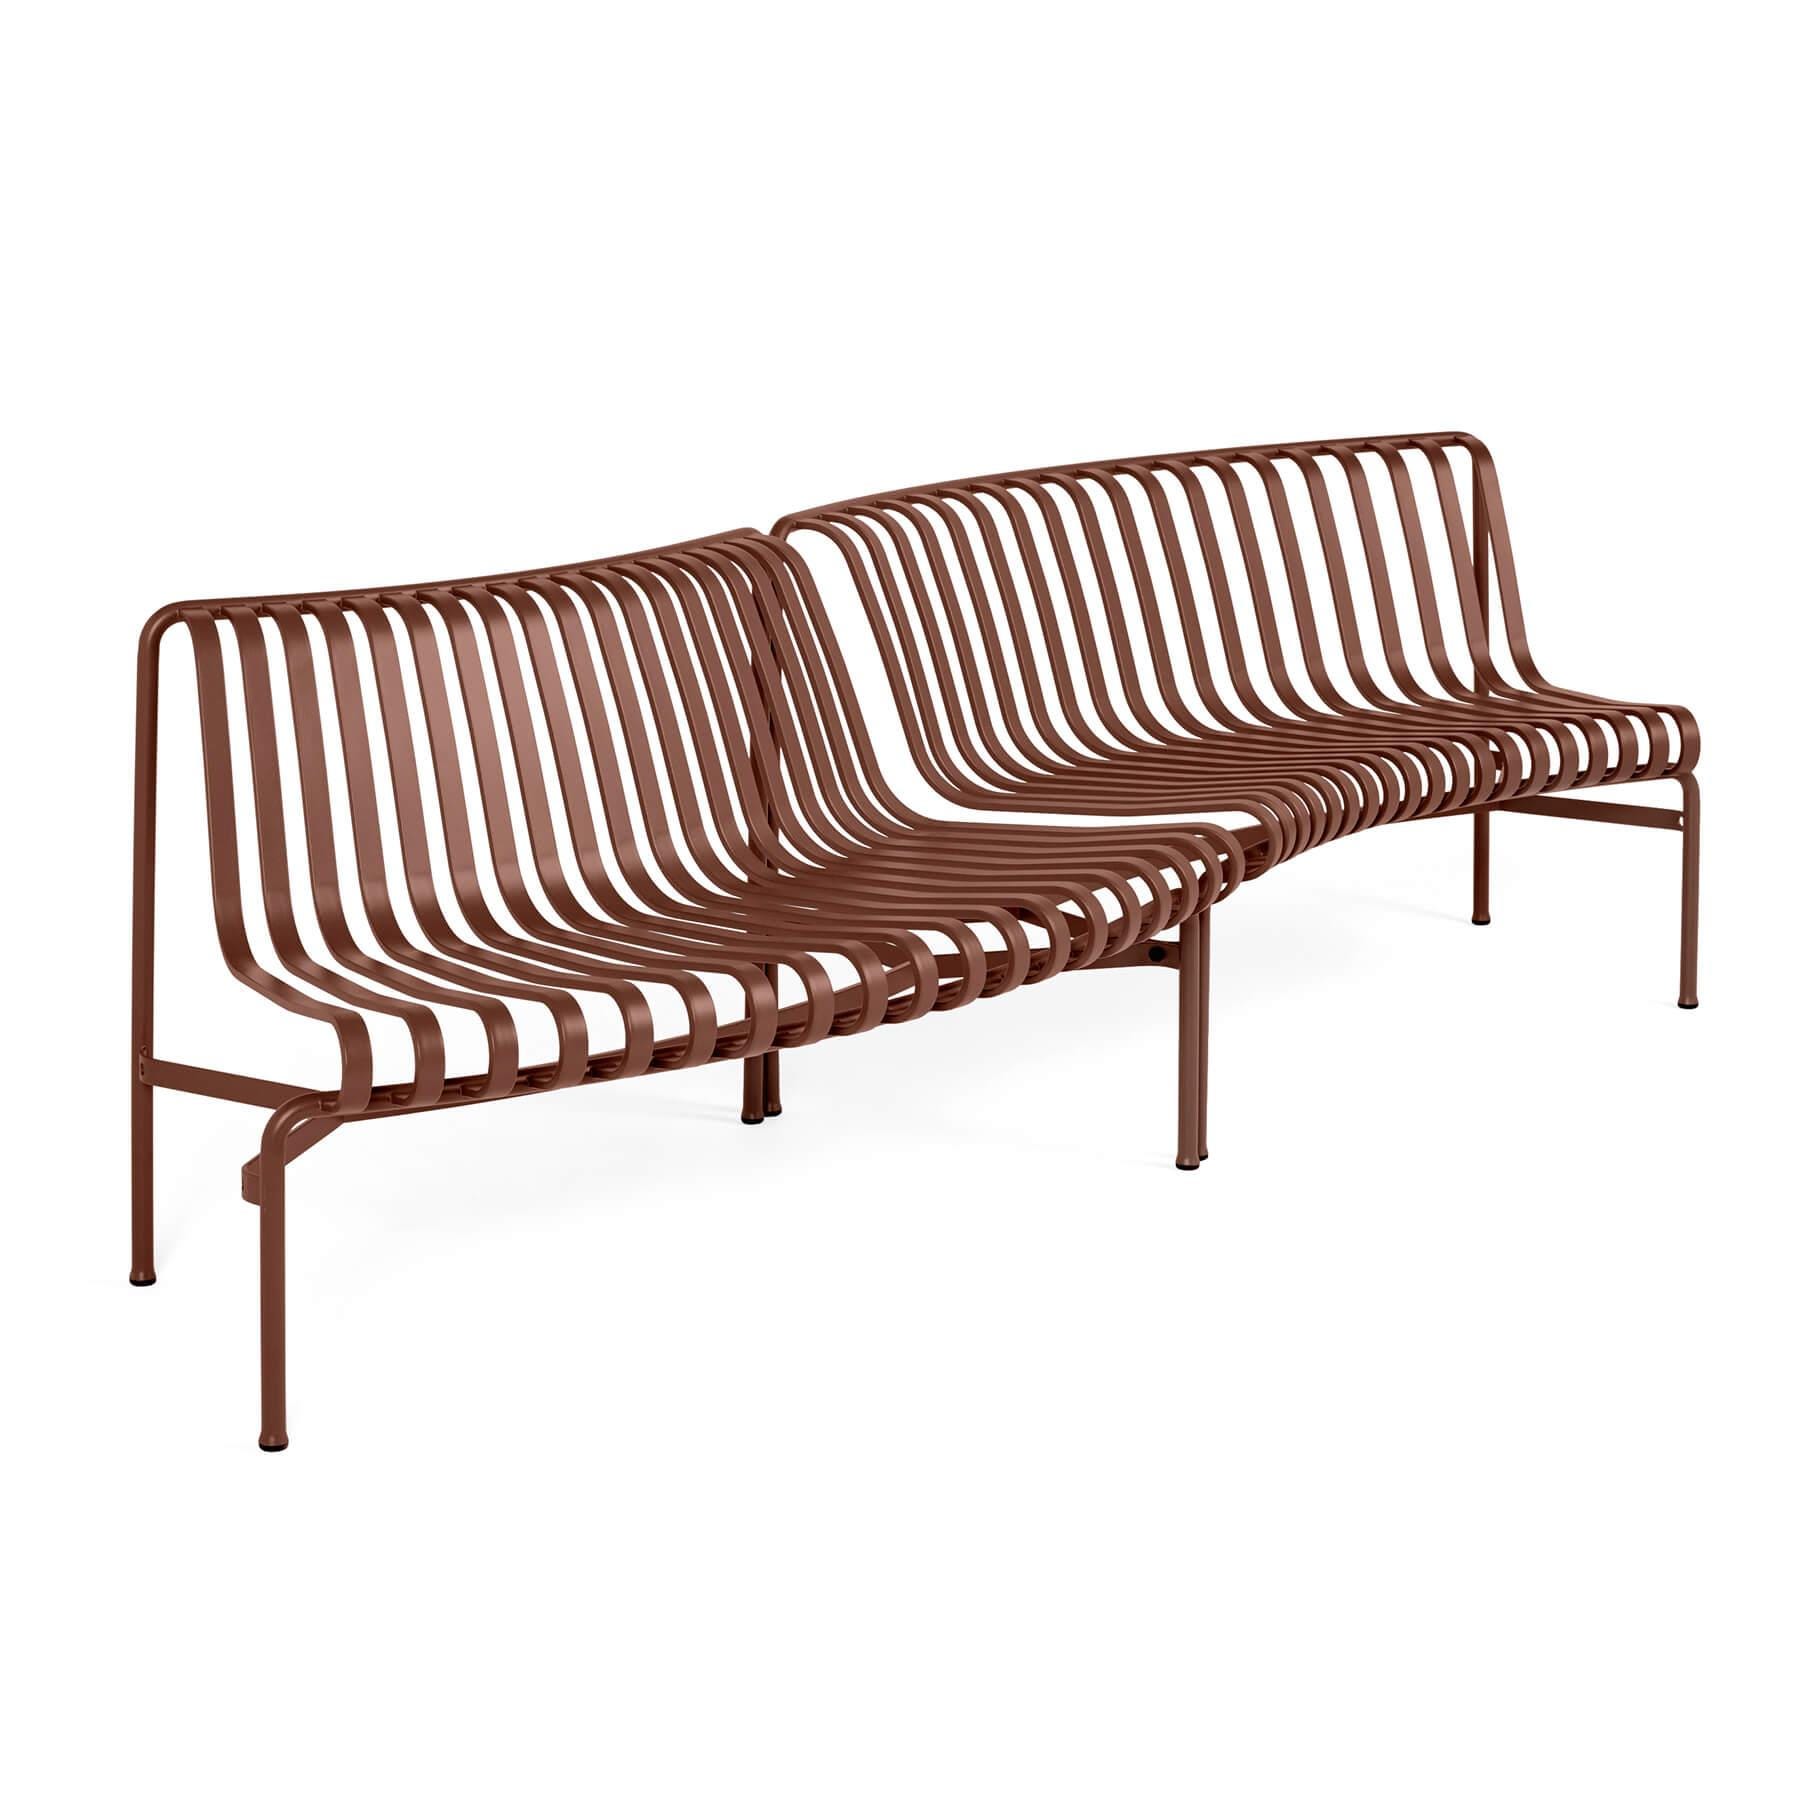 Hay Palissade Park Dining Bench In Out Iron Red Designer Furniture From Holloways Of Ludlow